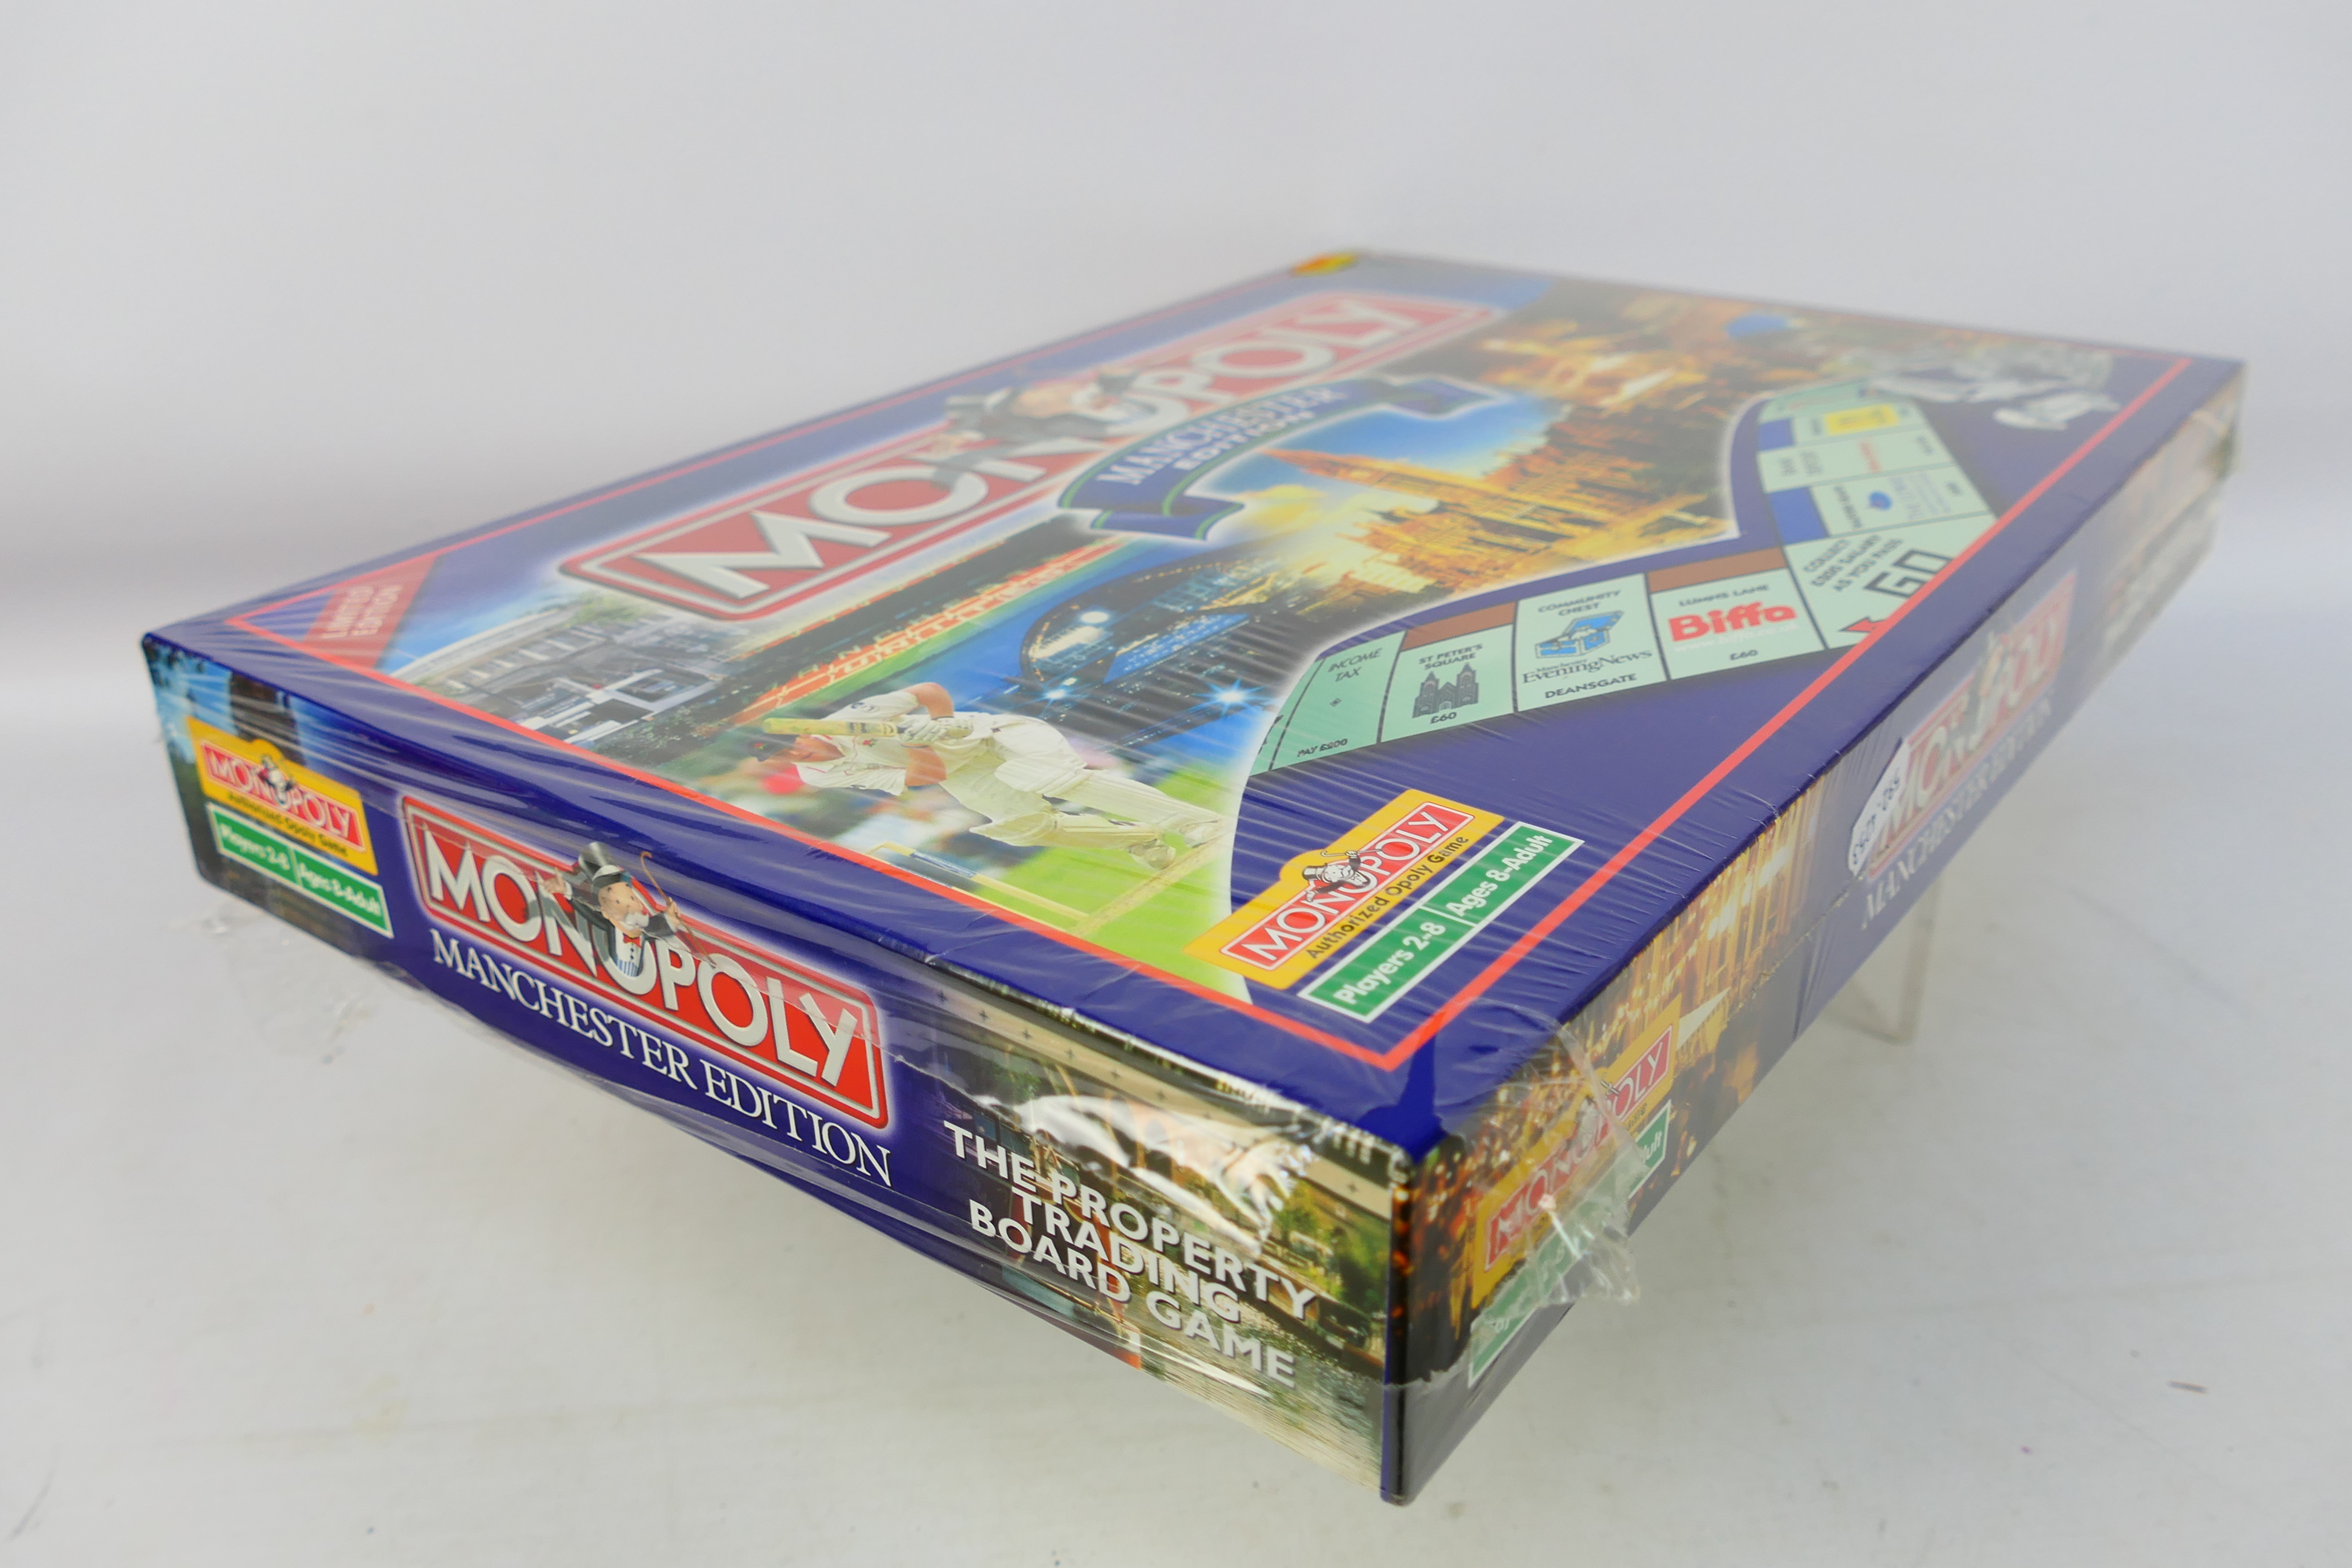 Hasbro - Monopoly - An unopened Manchest - Image 4 of 4